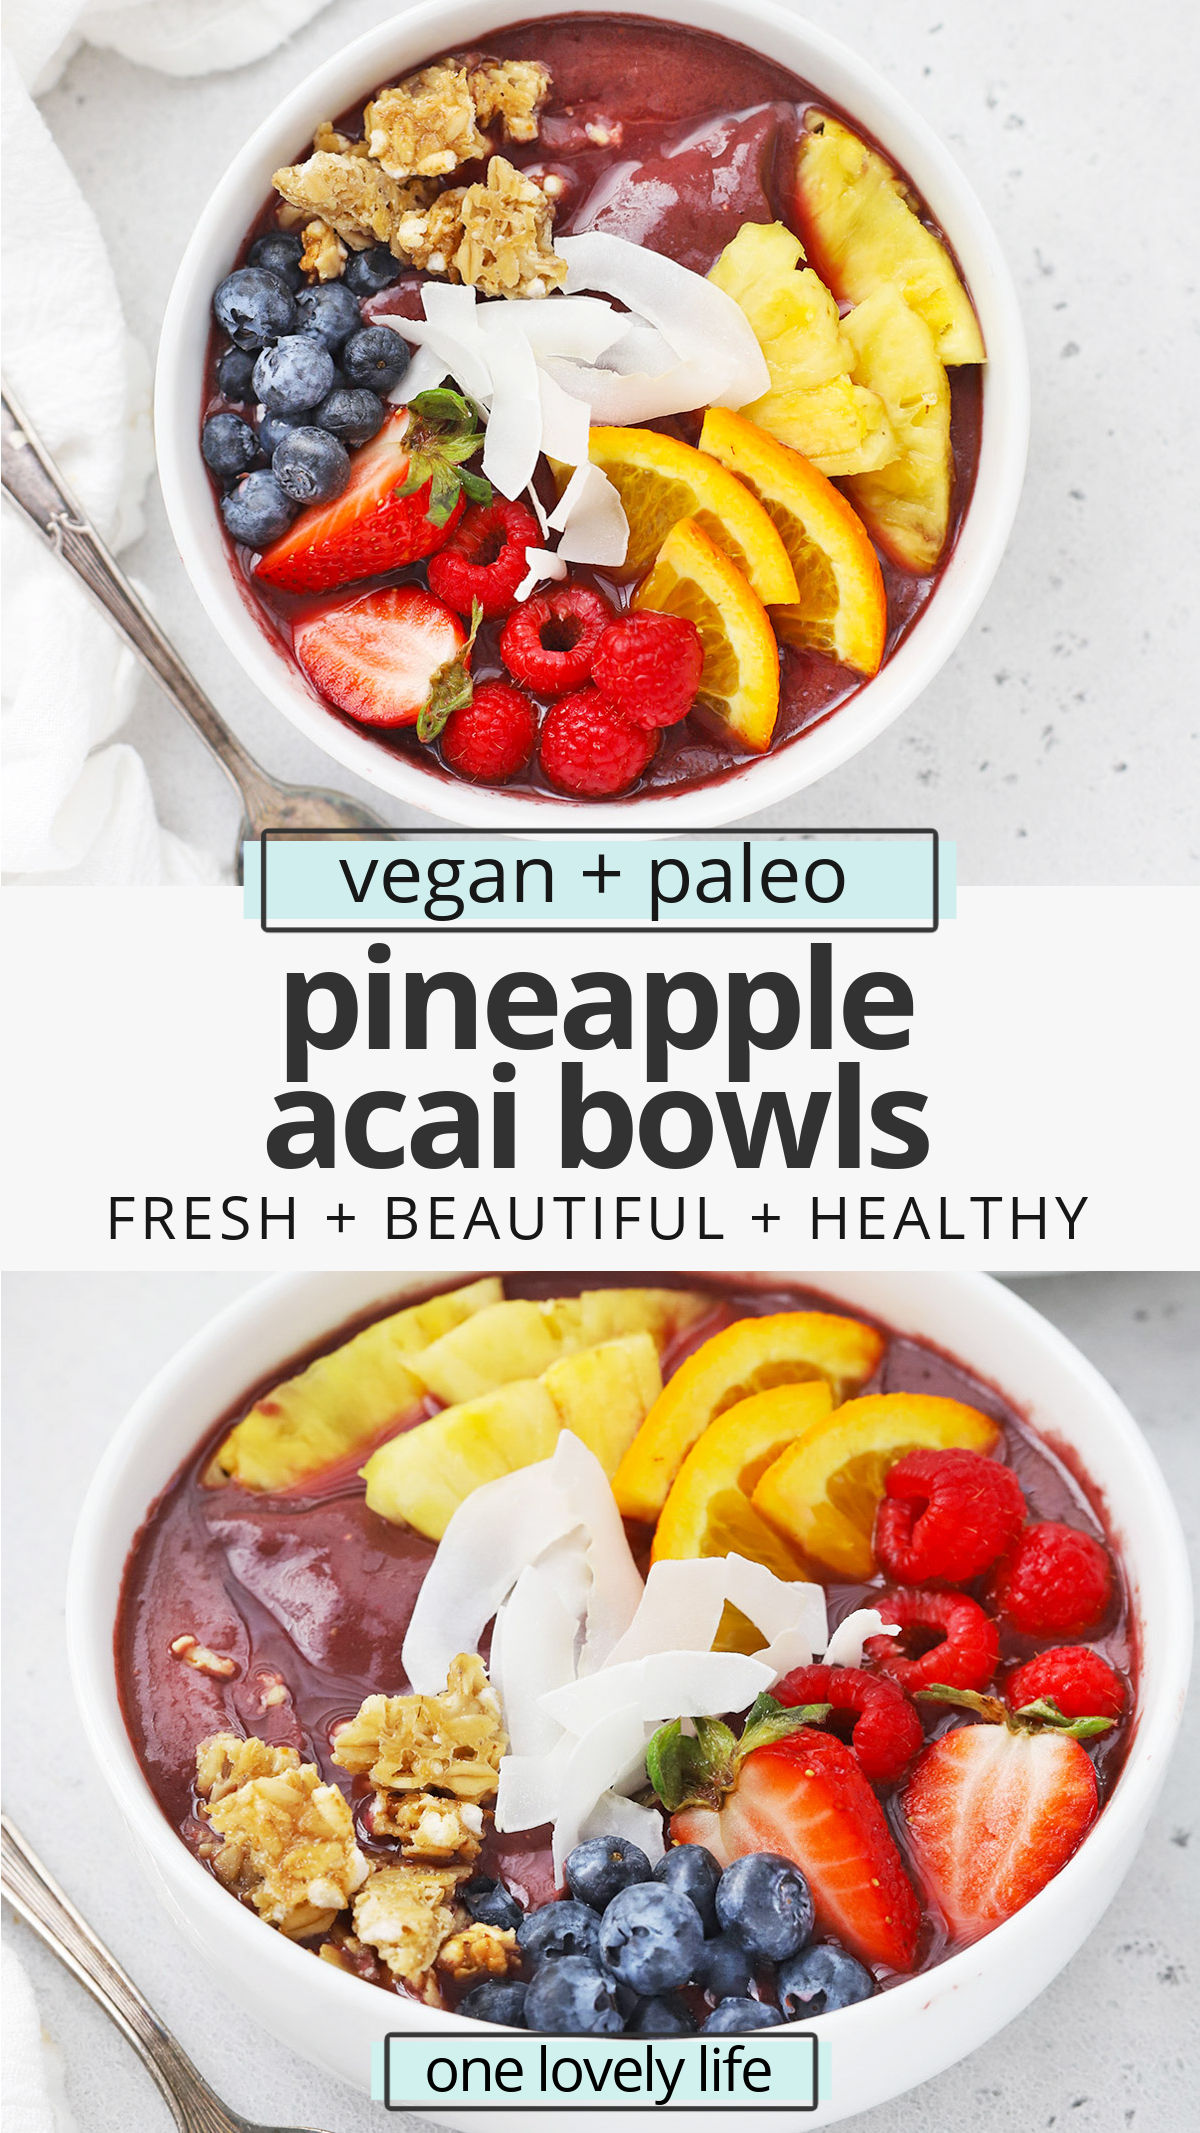 Pineapple Acai Bowls - These sweet, fresh tropical acai bowls are perfect for a hot day. Don't miss our list of toppings to try! (Vegan, Paleo) // Pineapple Acai Smoothie Bowl // Tropical Acai Bowl Recipe // Paleo Breakfast // Vegan Breakfast // Healthy Breakfast // Acai Bowls recipe // healthy snack #acai #smoothiebowl #acaibowl #vegan #paleo #healthy